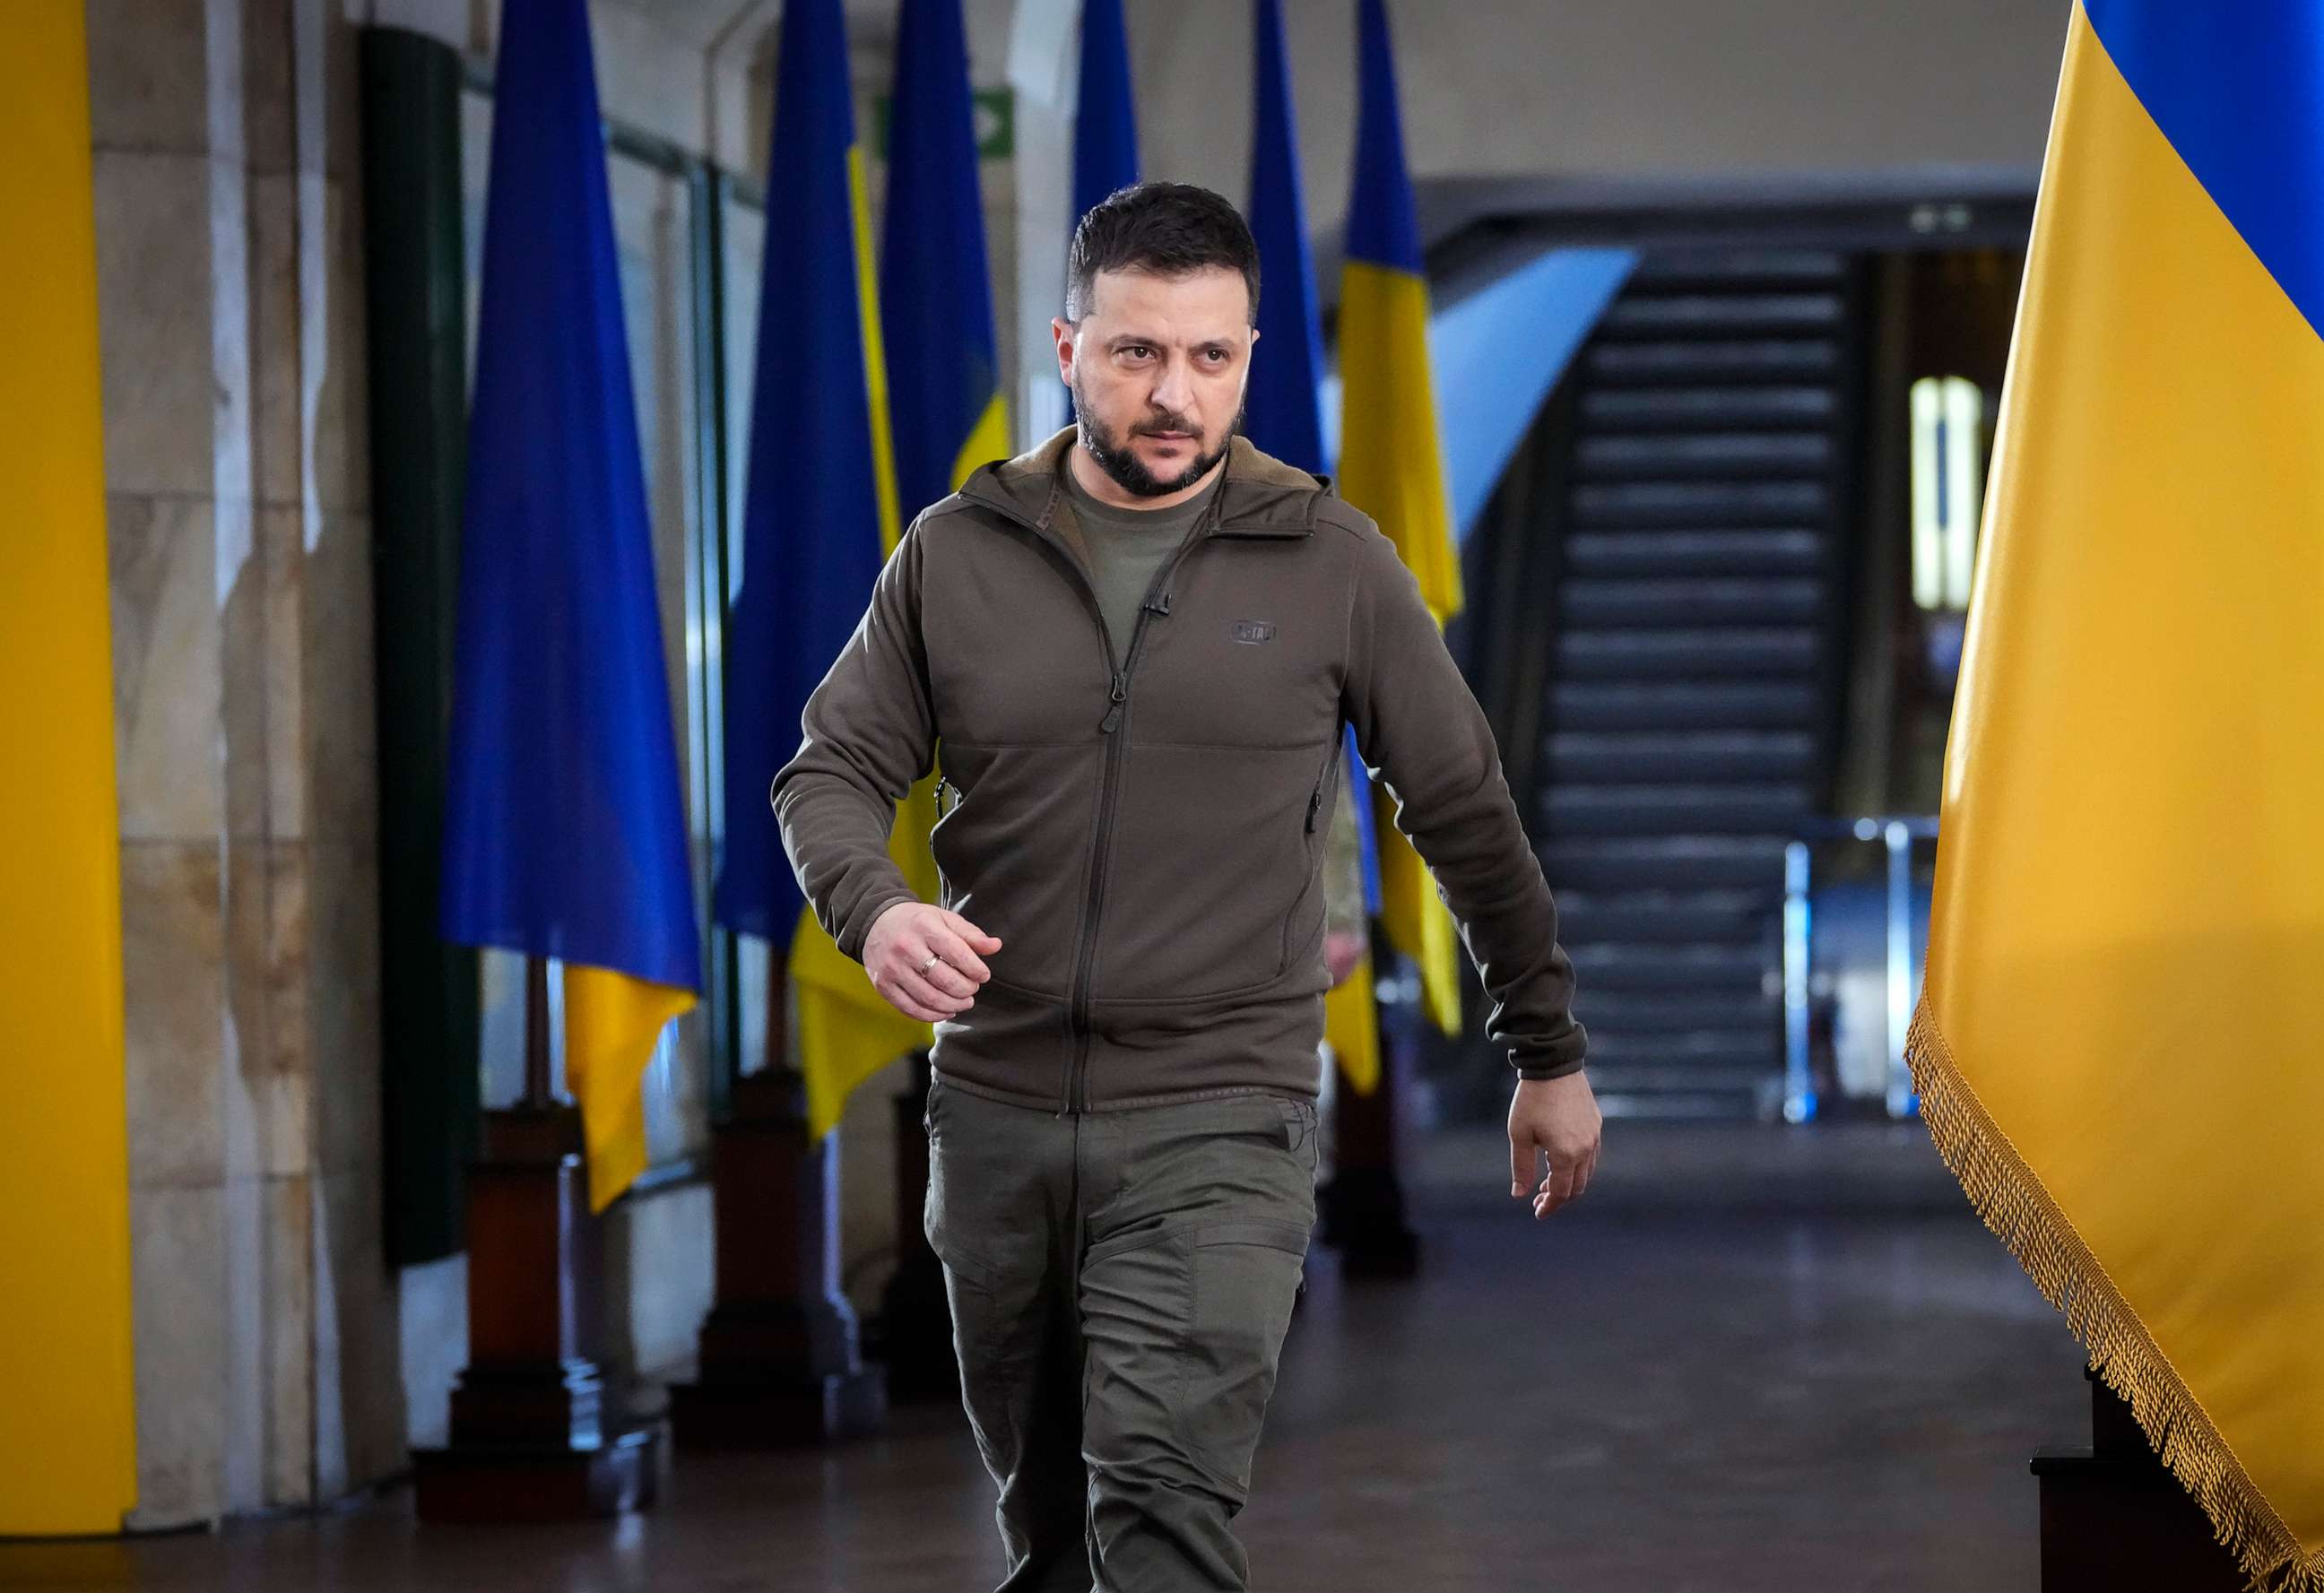 PHOTO: Ukrainian President Volodymyr Zelenskyy arrives for a press conference in a city subway under a central square in Kyiv, Ukraine, April 23, 2022.